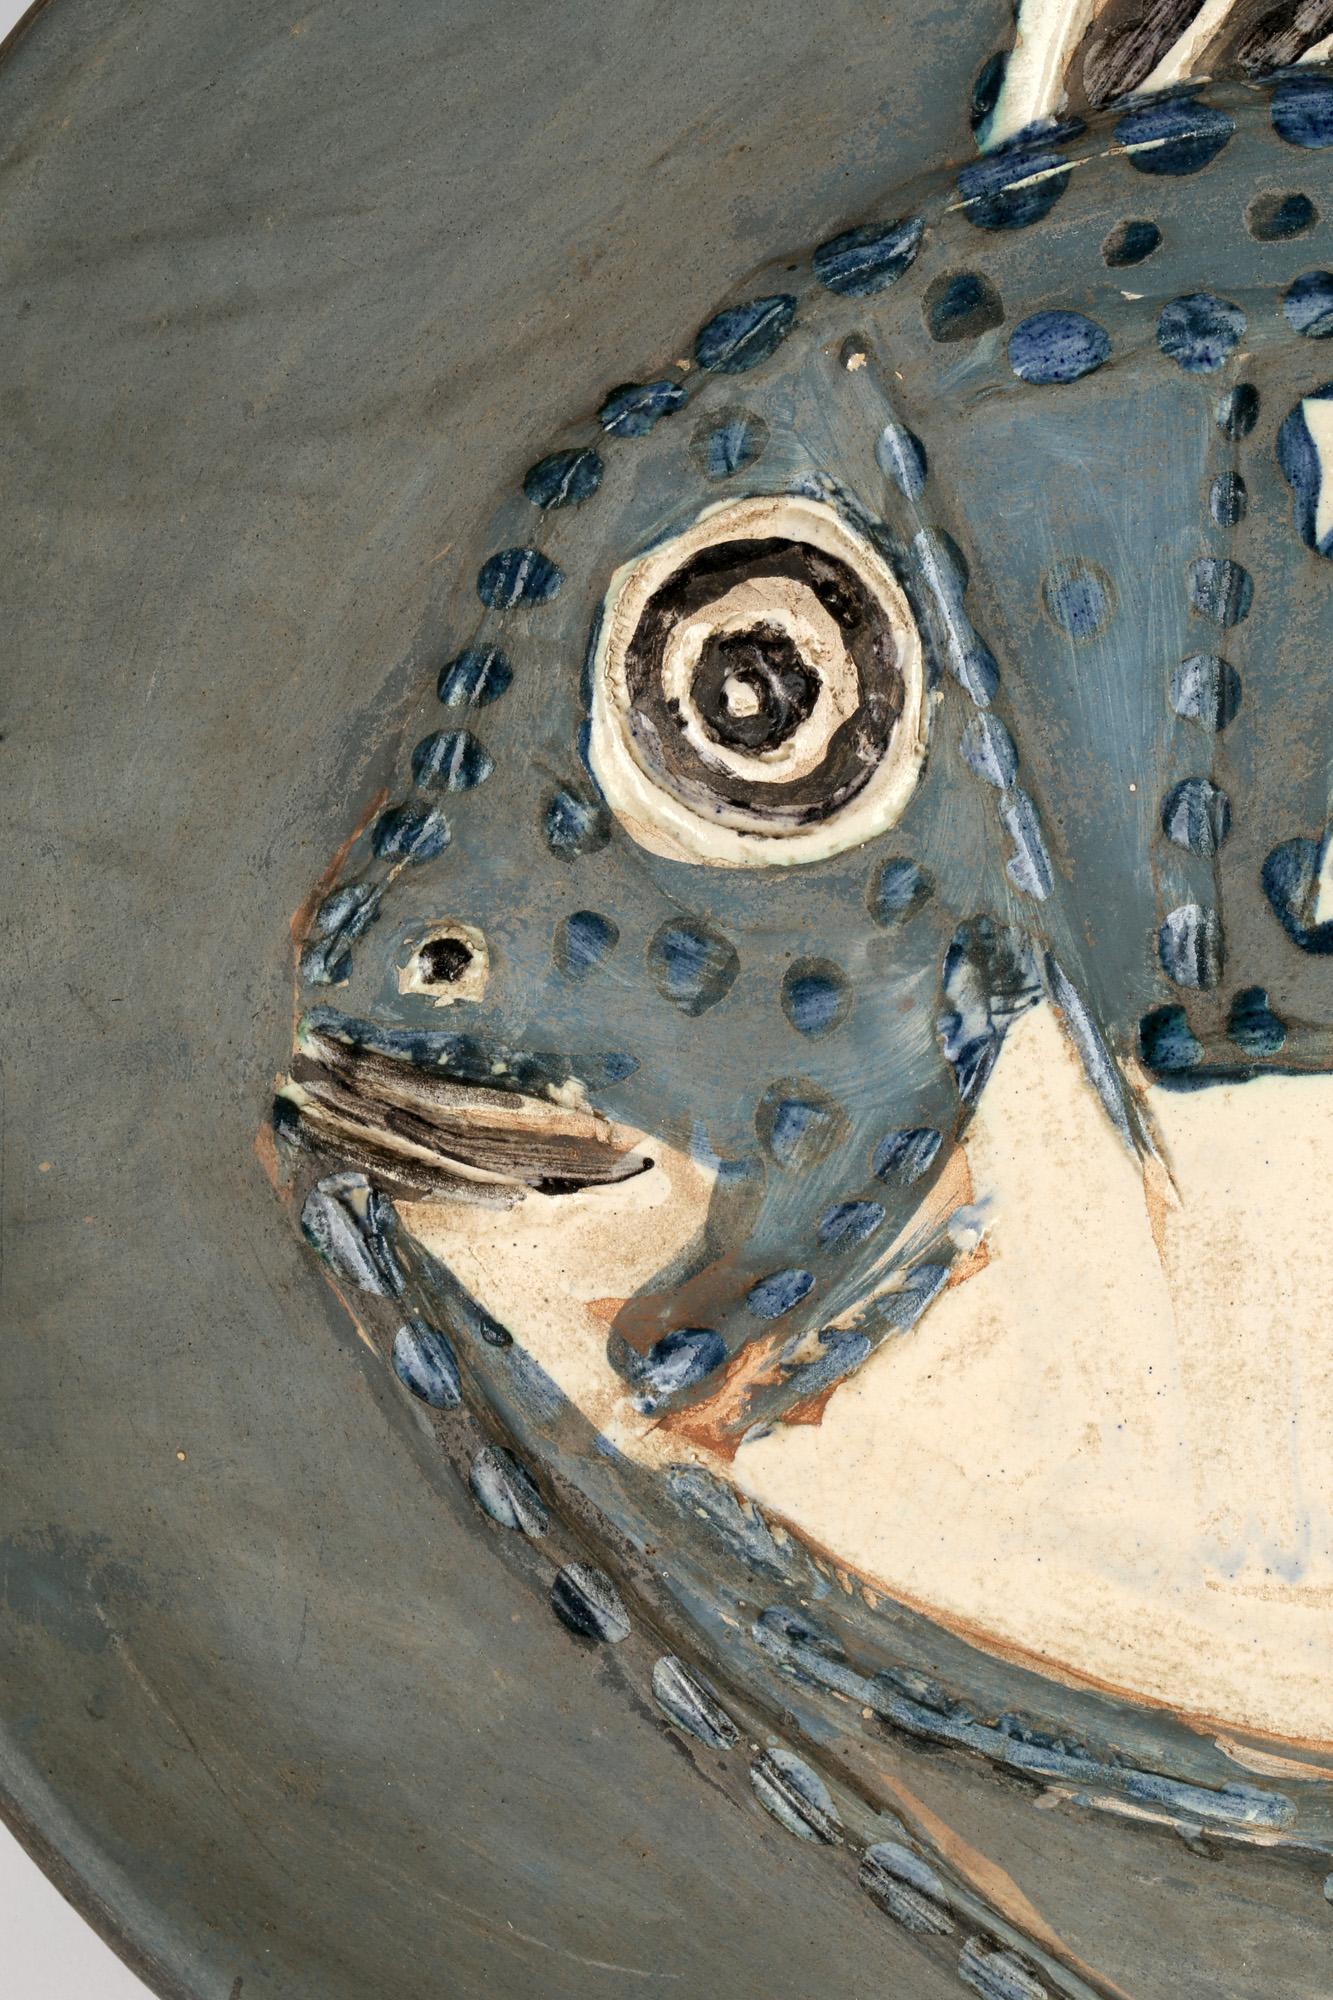 A unique variant Plat Poisson (see A.R. 166-171) terre de faience platter portraying a fish by Pablo Picasso and dated 6th June 1952. The oval shaped platter is potted in white earthenware clay and decorated in raised engobe colors set within a grey